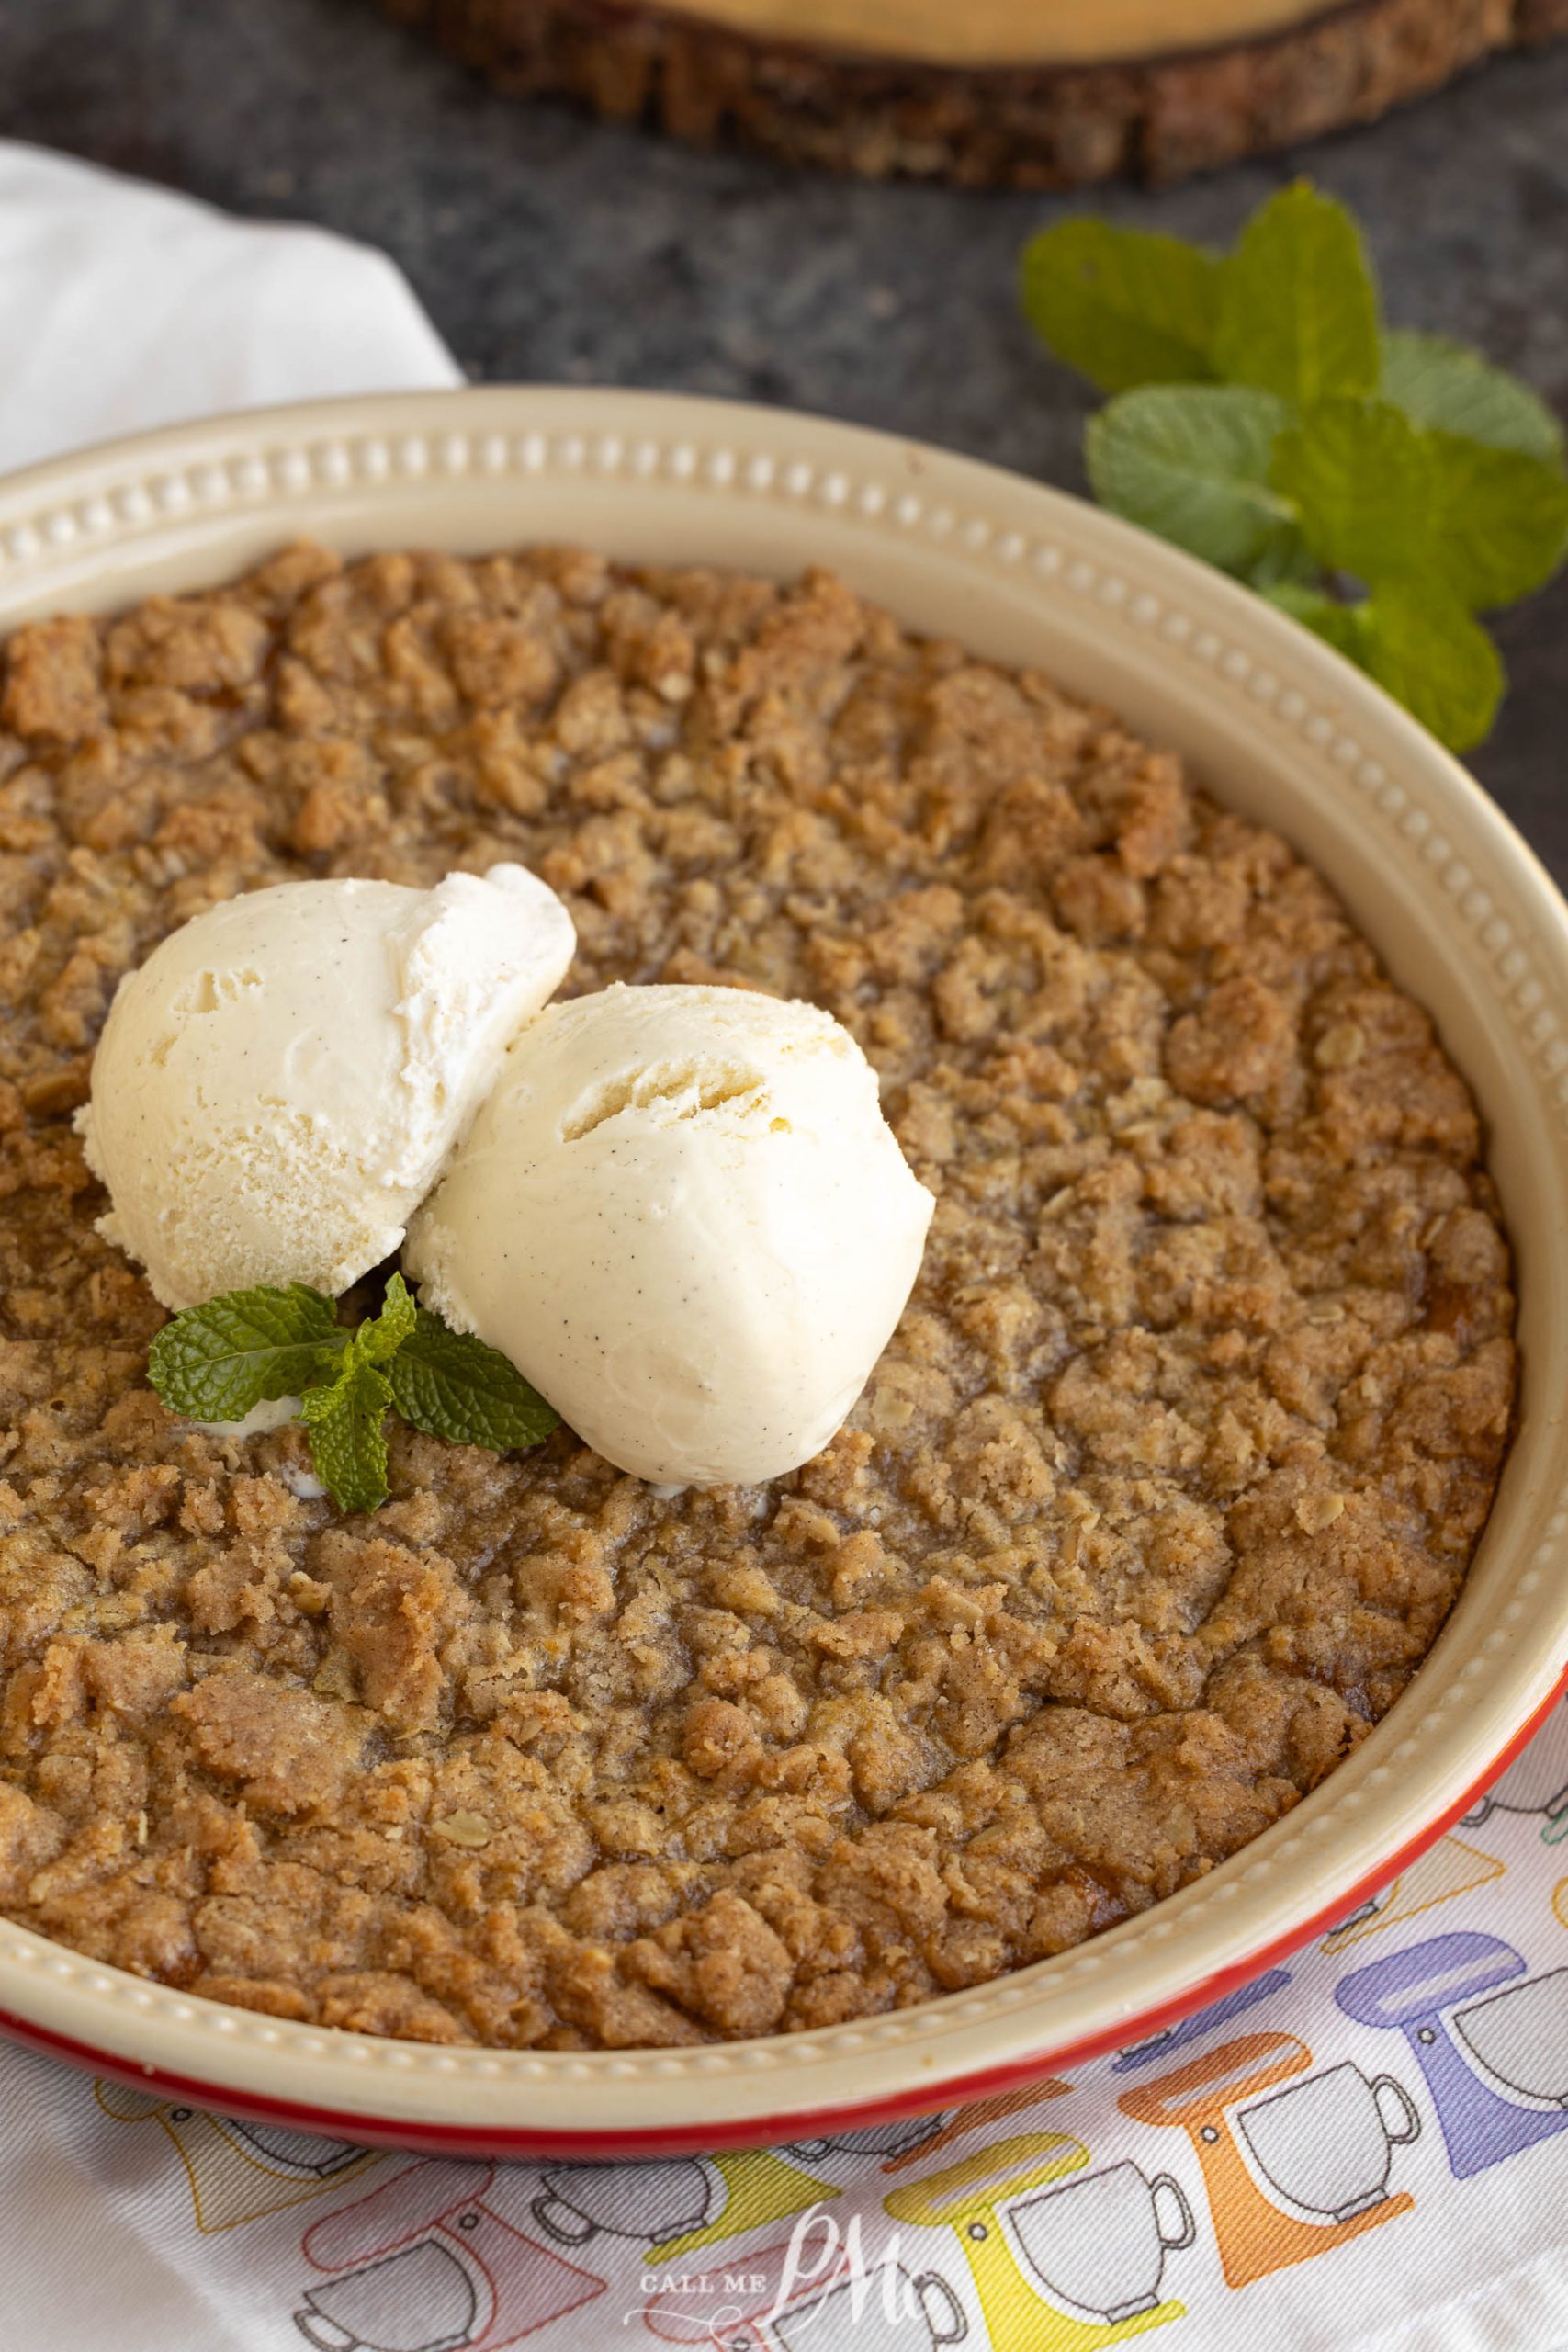 Crustless Pumpkin Pie Crumble with a scoop of ice cream on top.